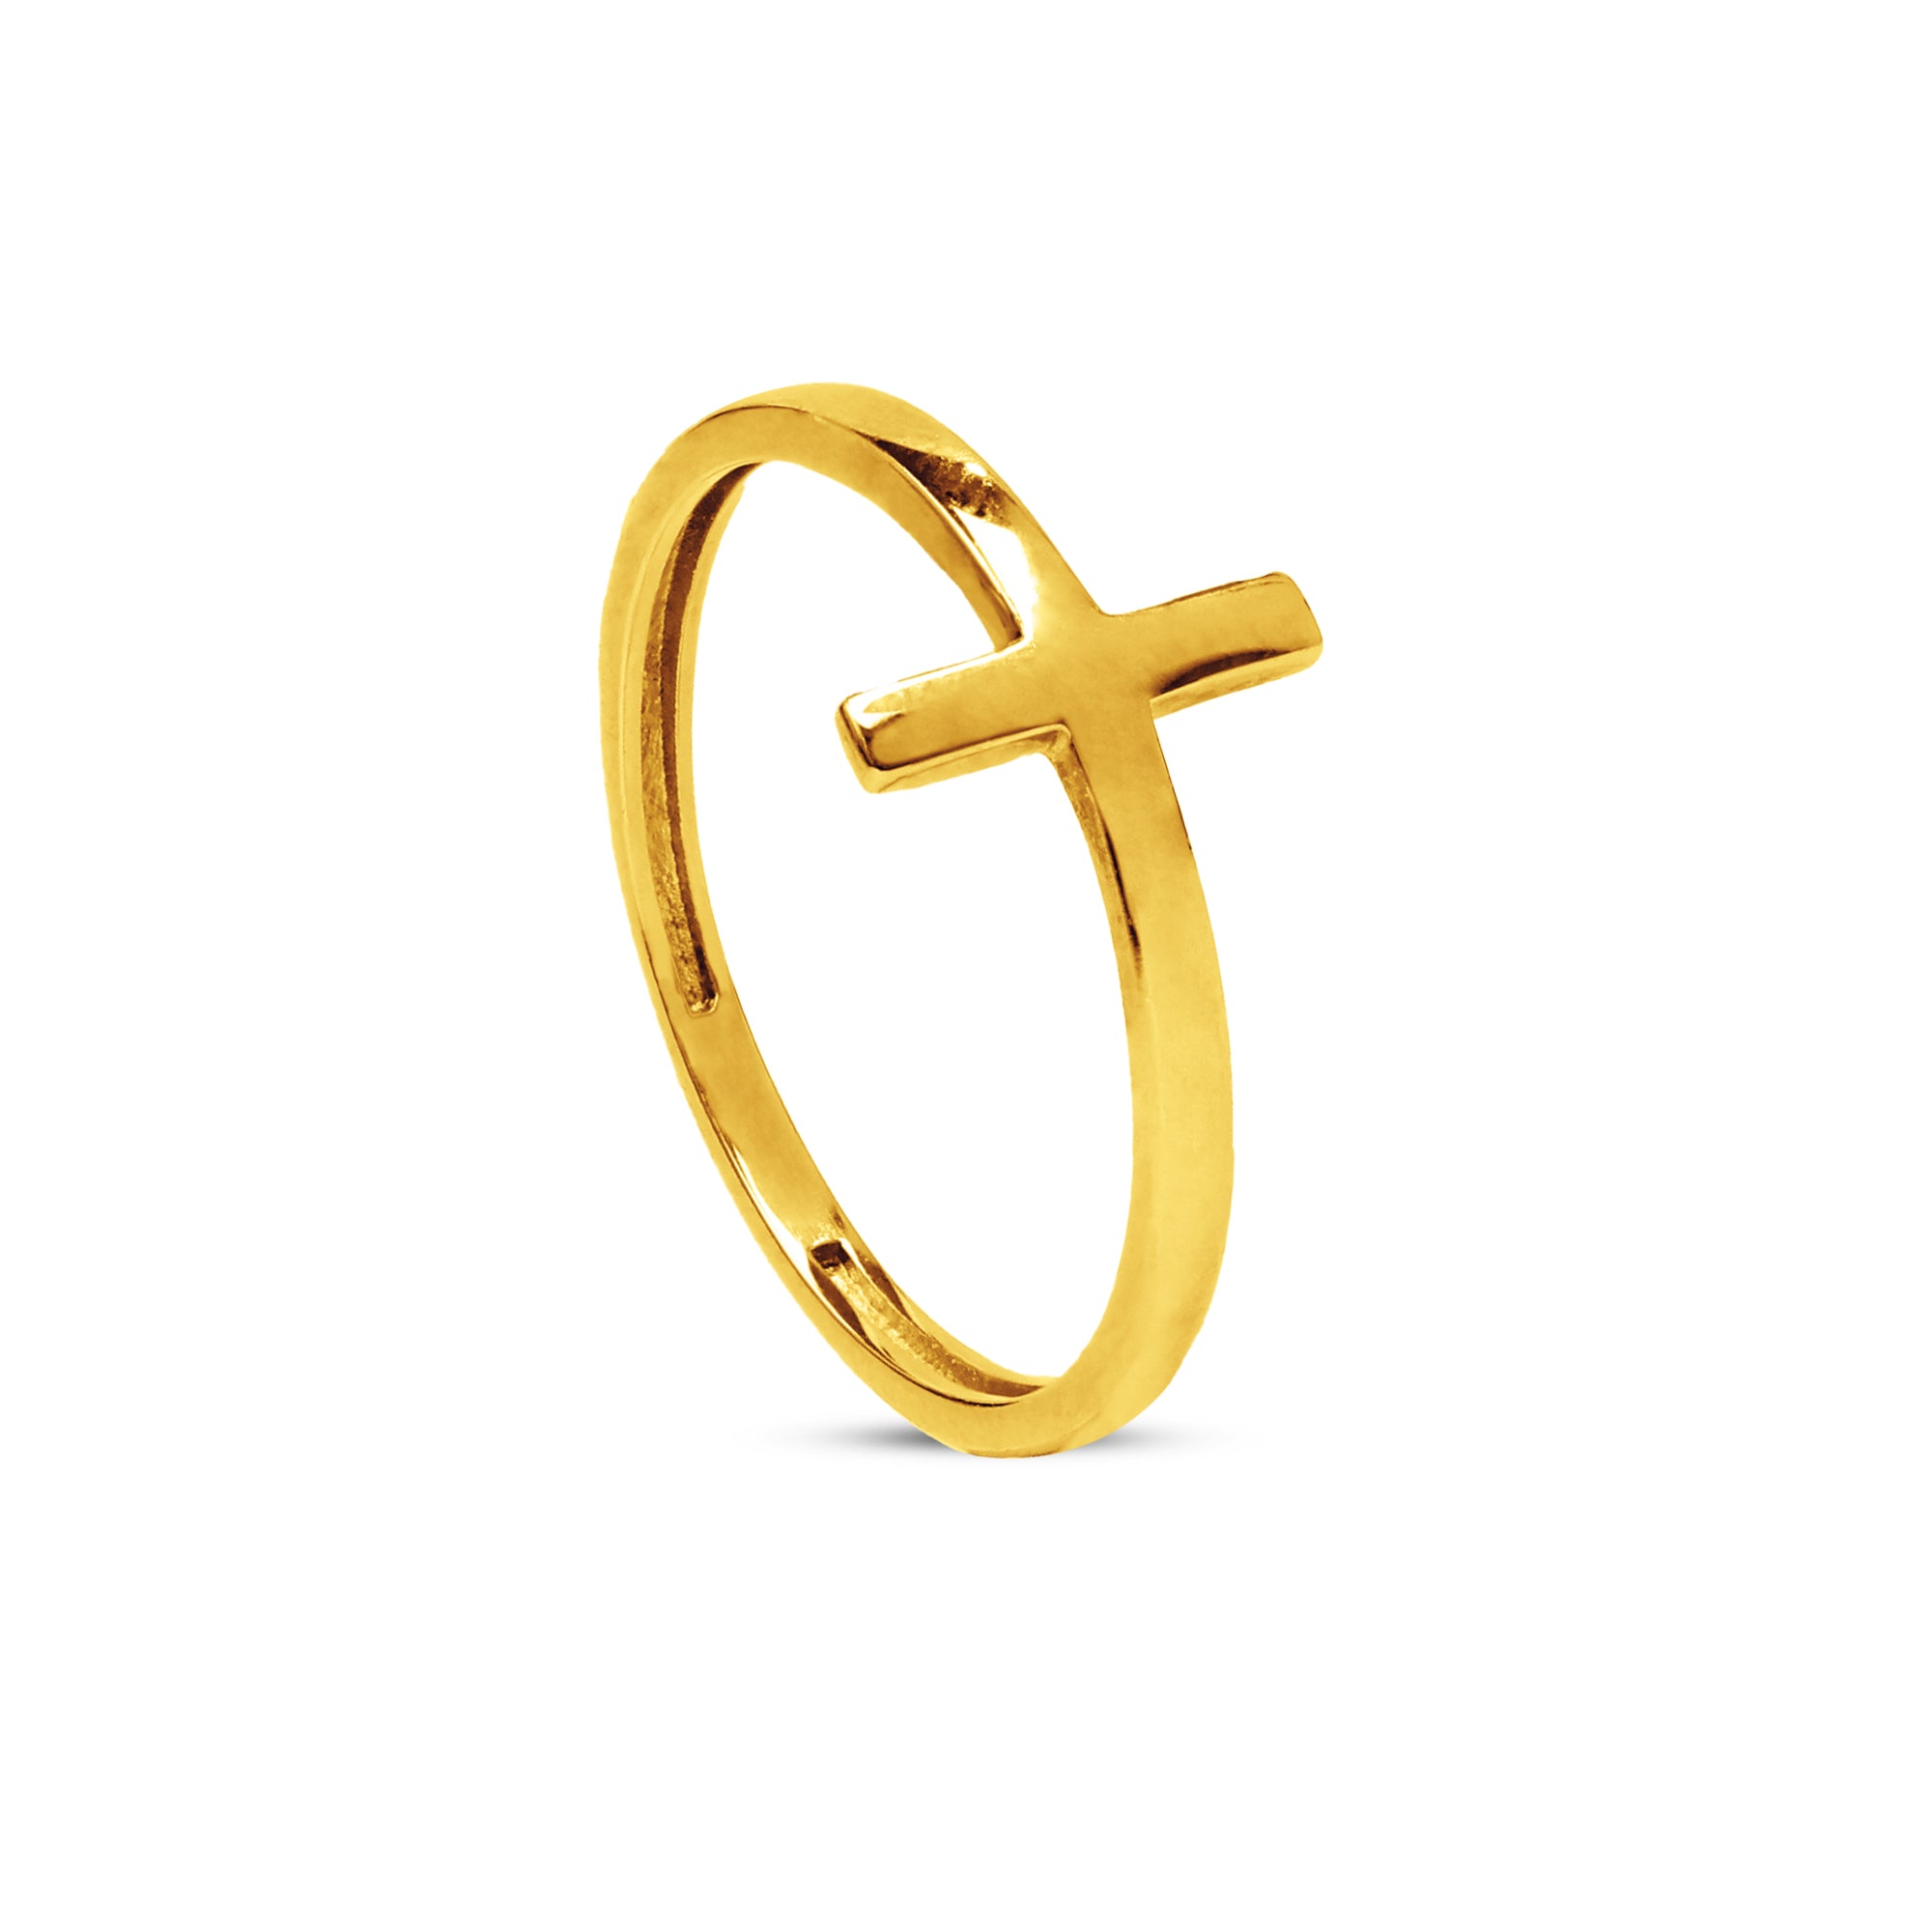 Mens Novelty Cross Ring in 14k Yellow Gold - AD8913